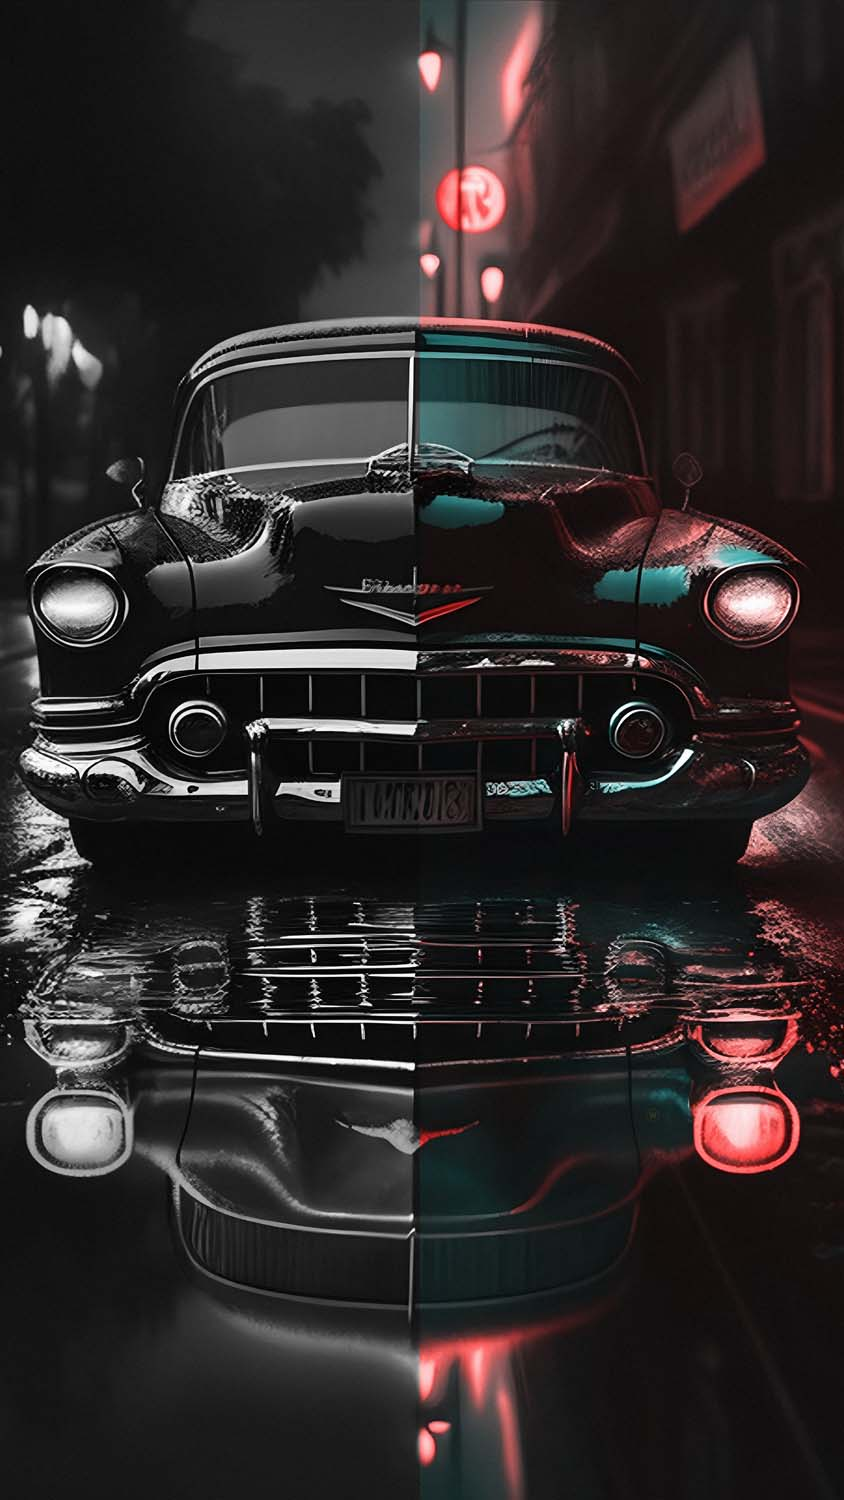 720x1280 Vintage Car Wallpapers for Mobile Phone [HD]